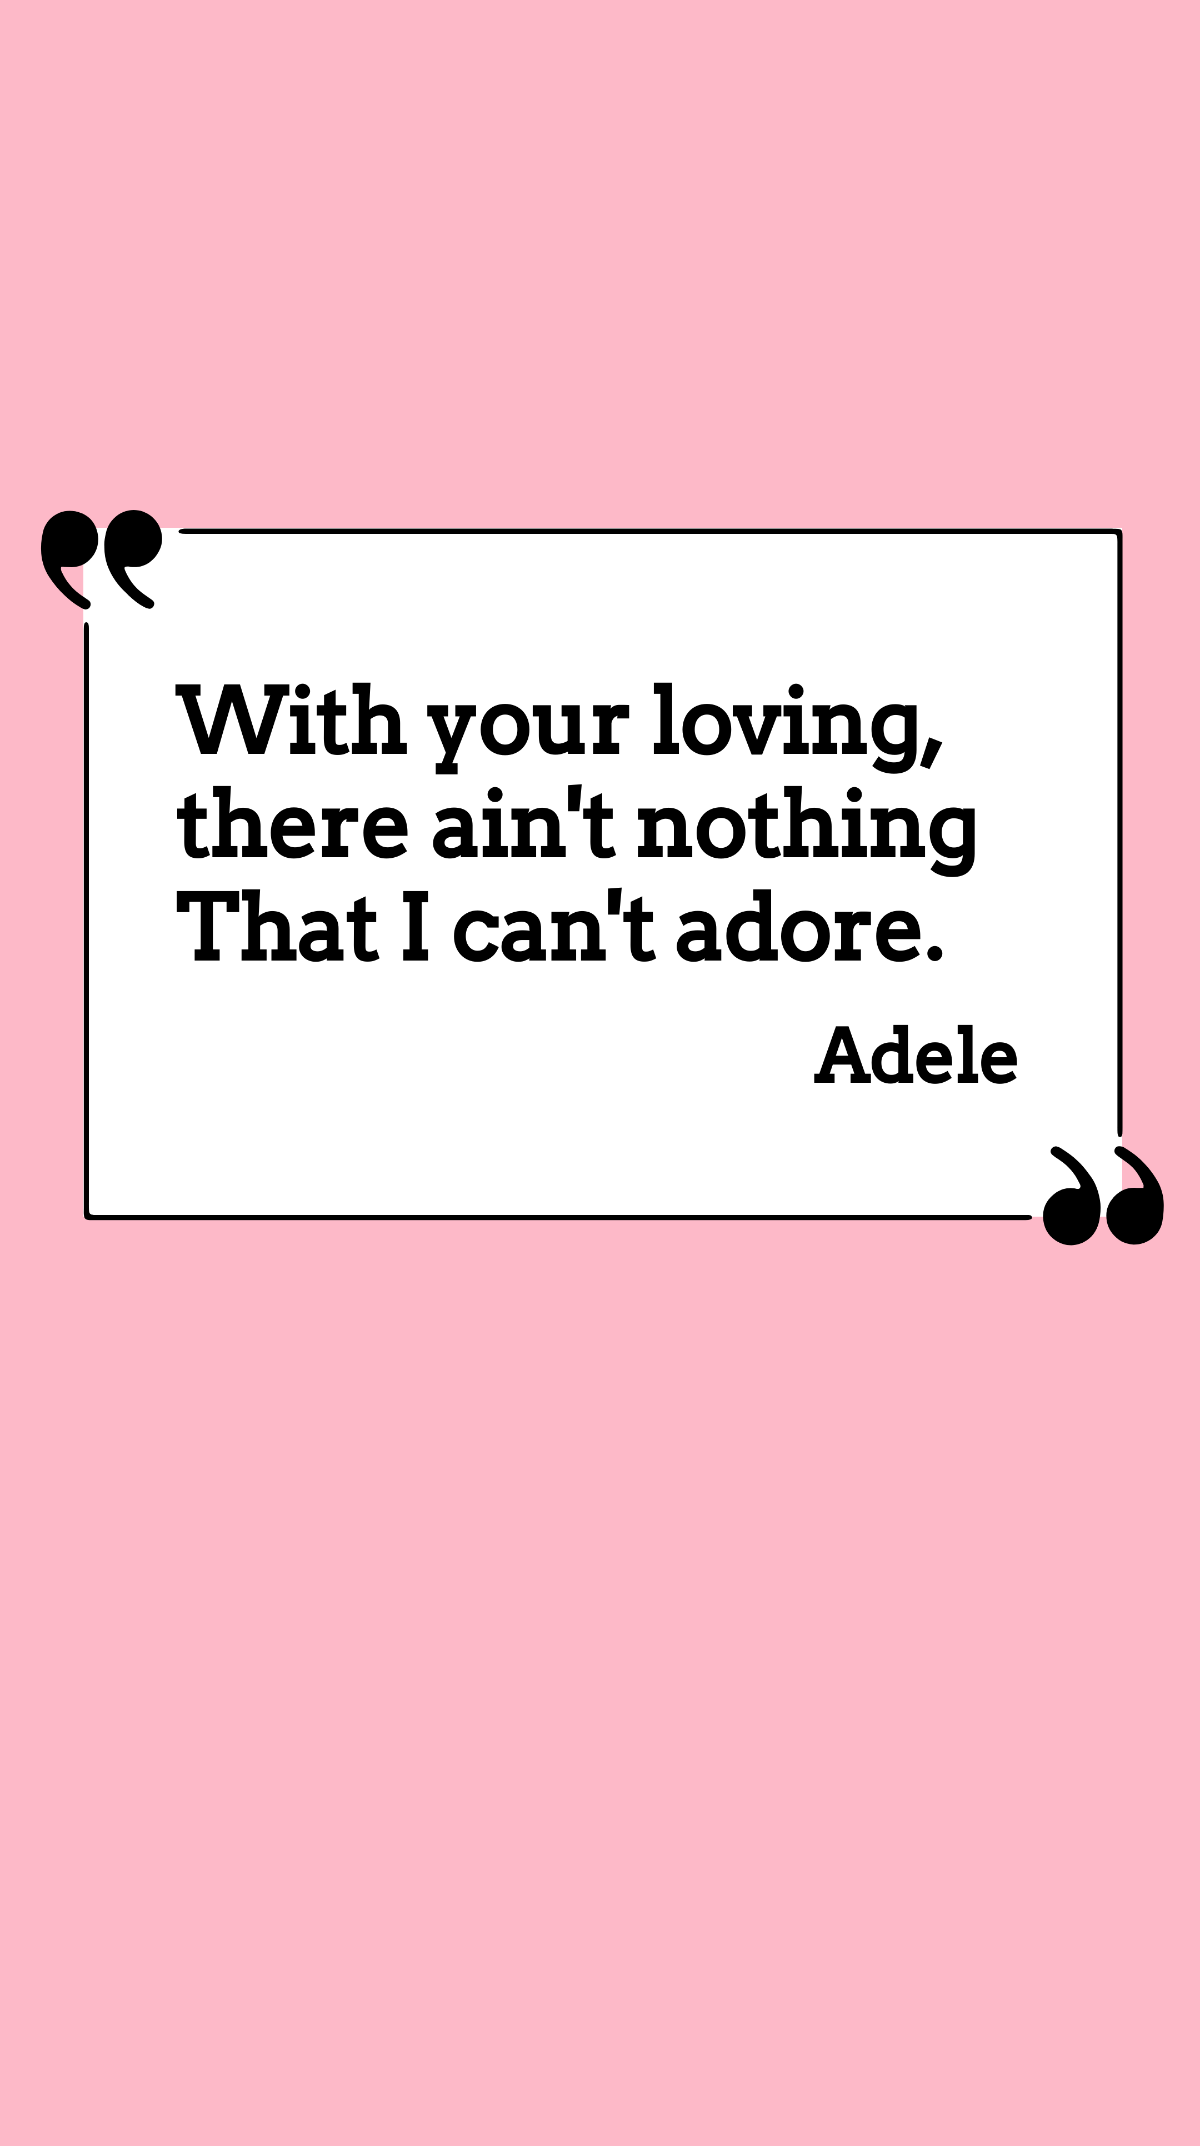 Free Adele - With your loving, there ain't nothing that I can't adore. Template